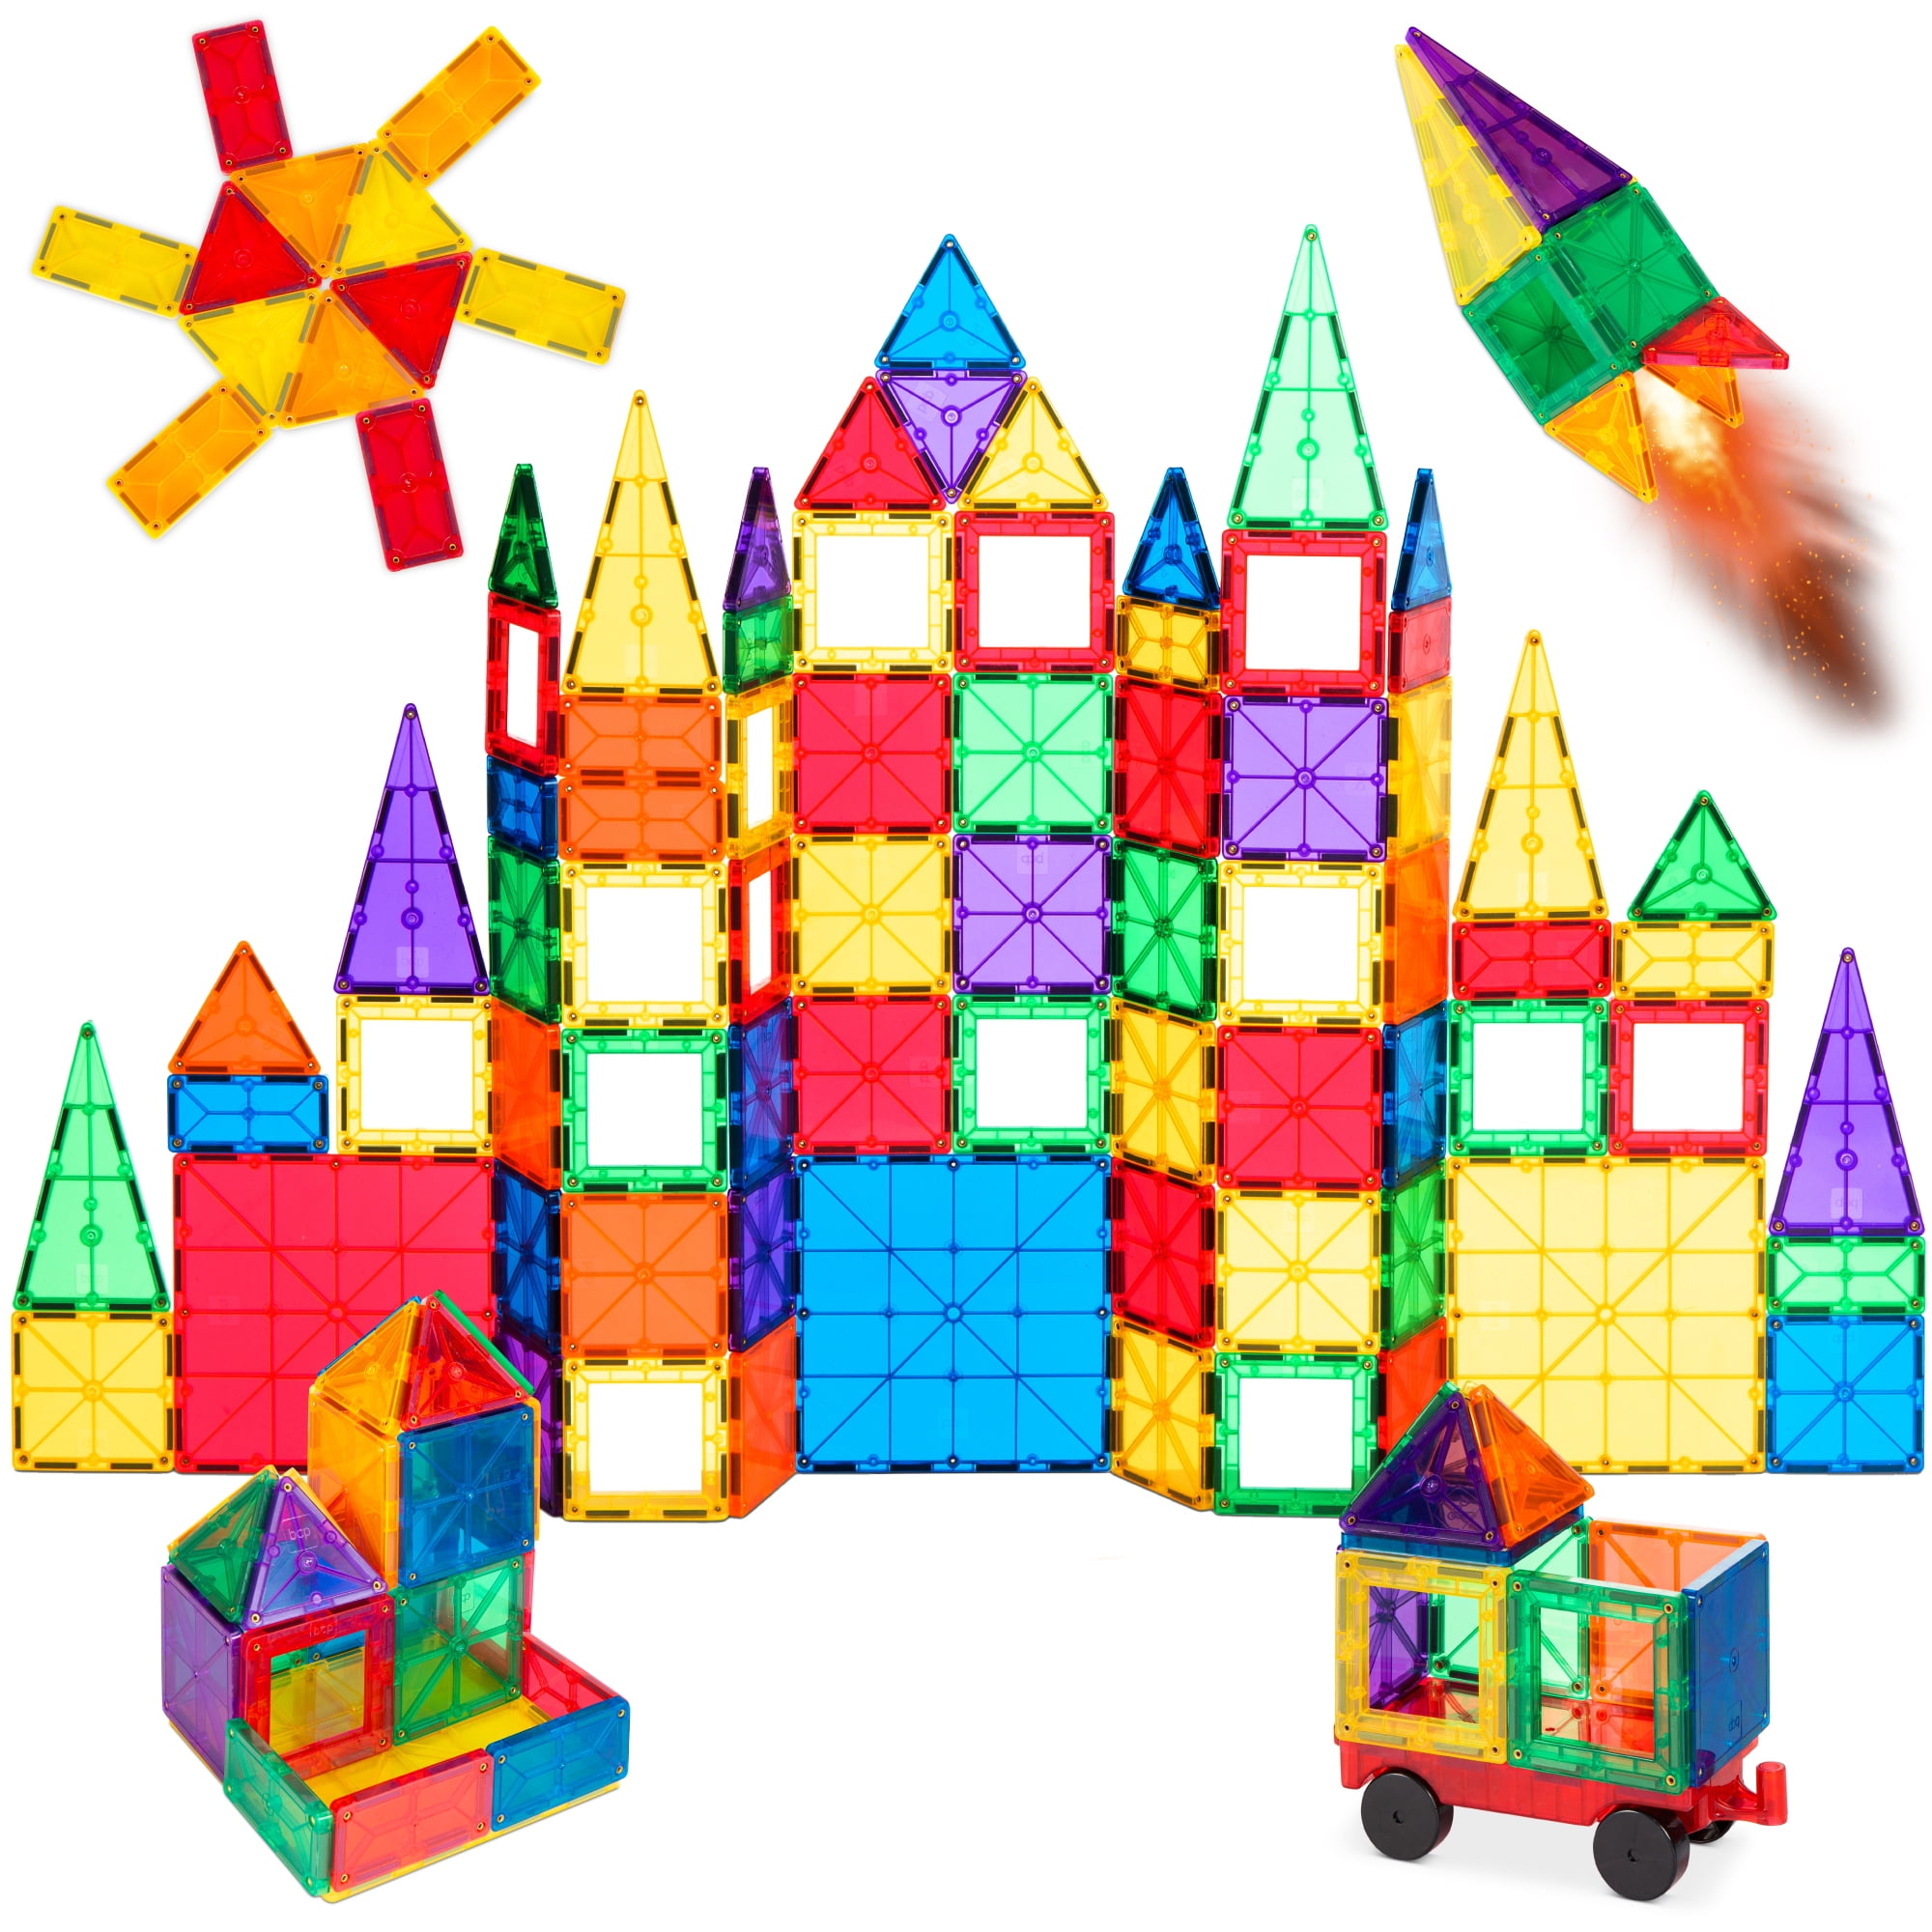 113 Piece Large Foam Building Blocks With Different Shapes And Sizes TB-50 